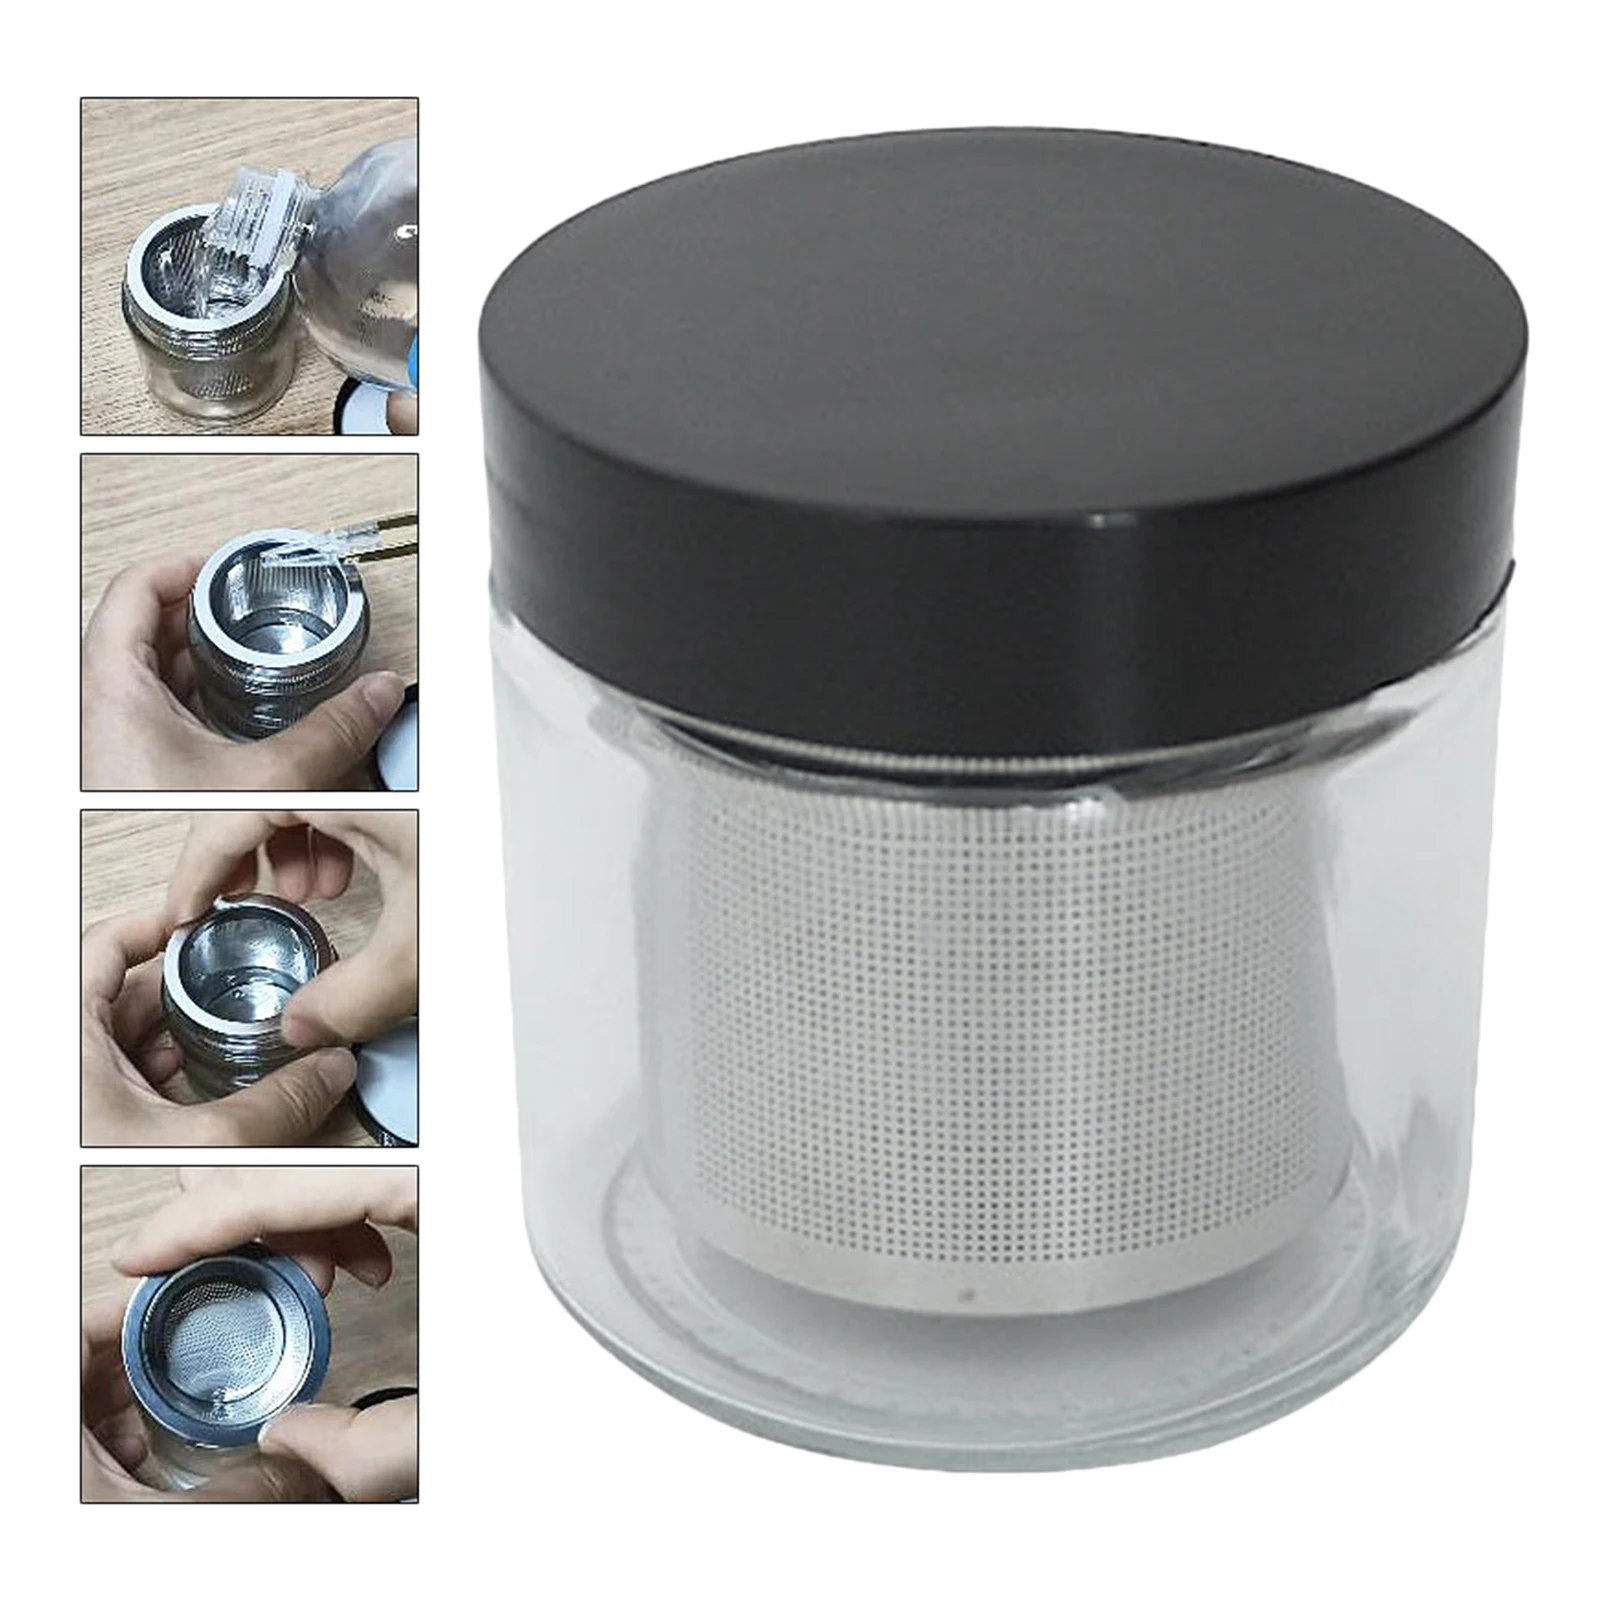 Glass Diamond Washing Cup Jewellery Gemstone Cleaning Jar Watchmaker Watch Parts Washing Tool Alcohol Washer